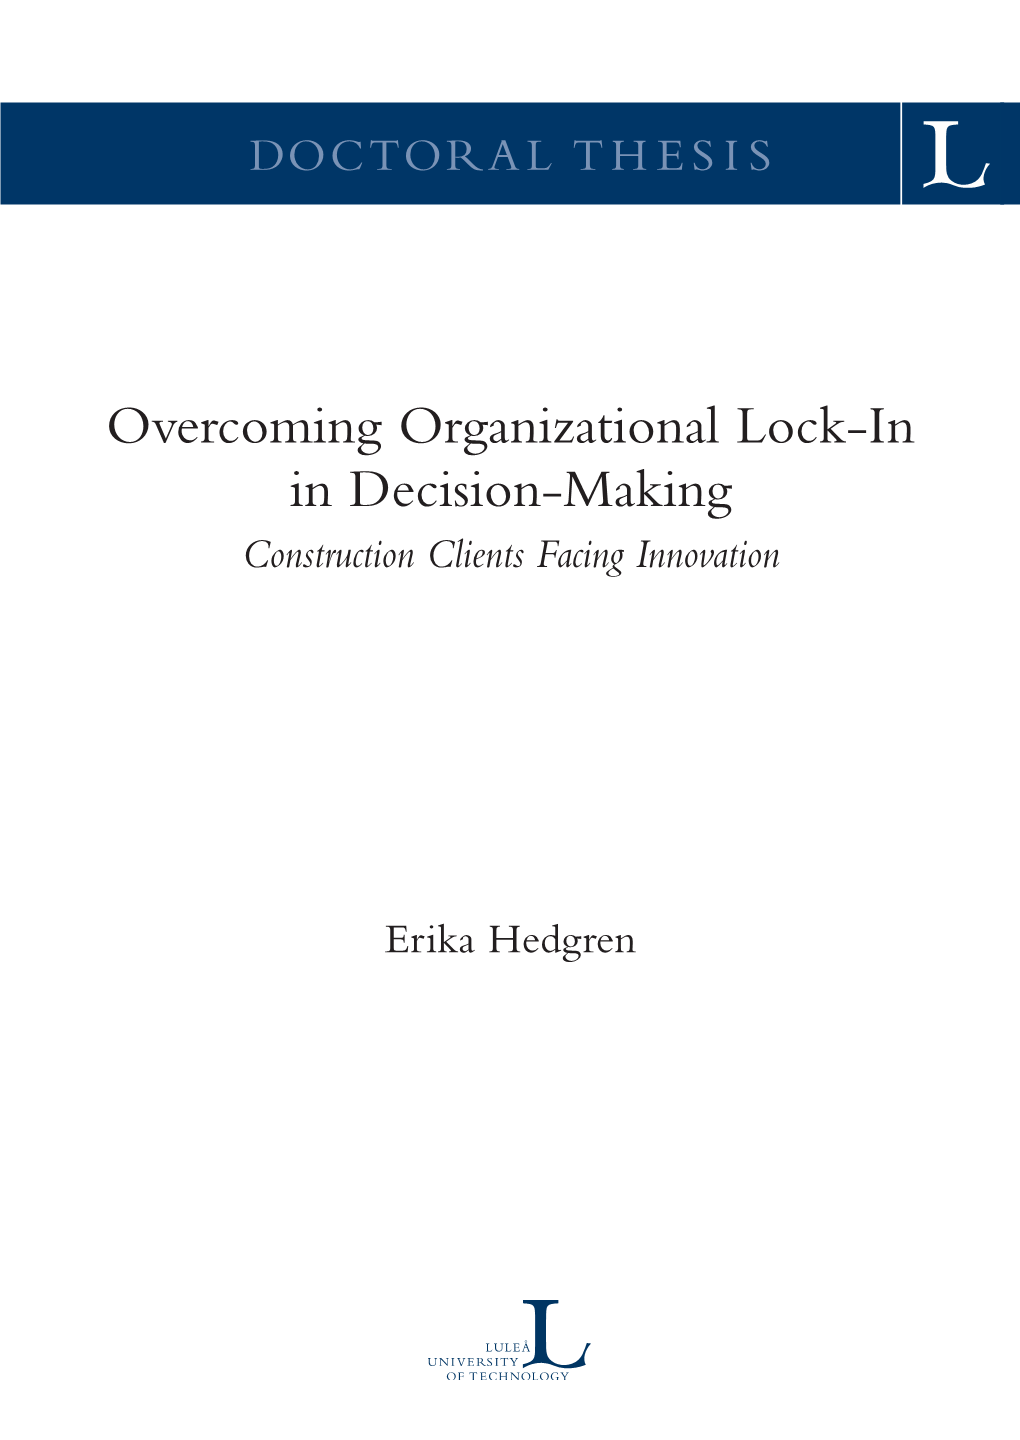 Overcoming Organizational Lock-In in Decision-Making Construction Clients Facing Innovation